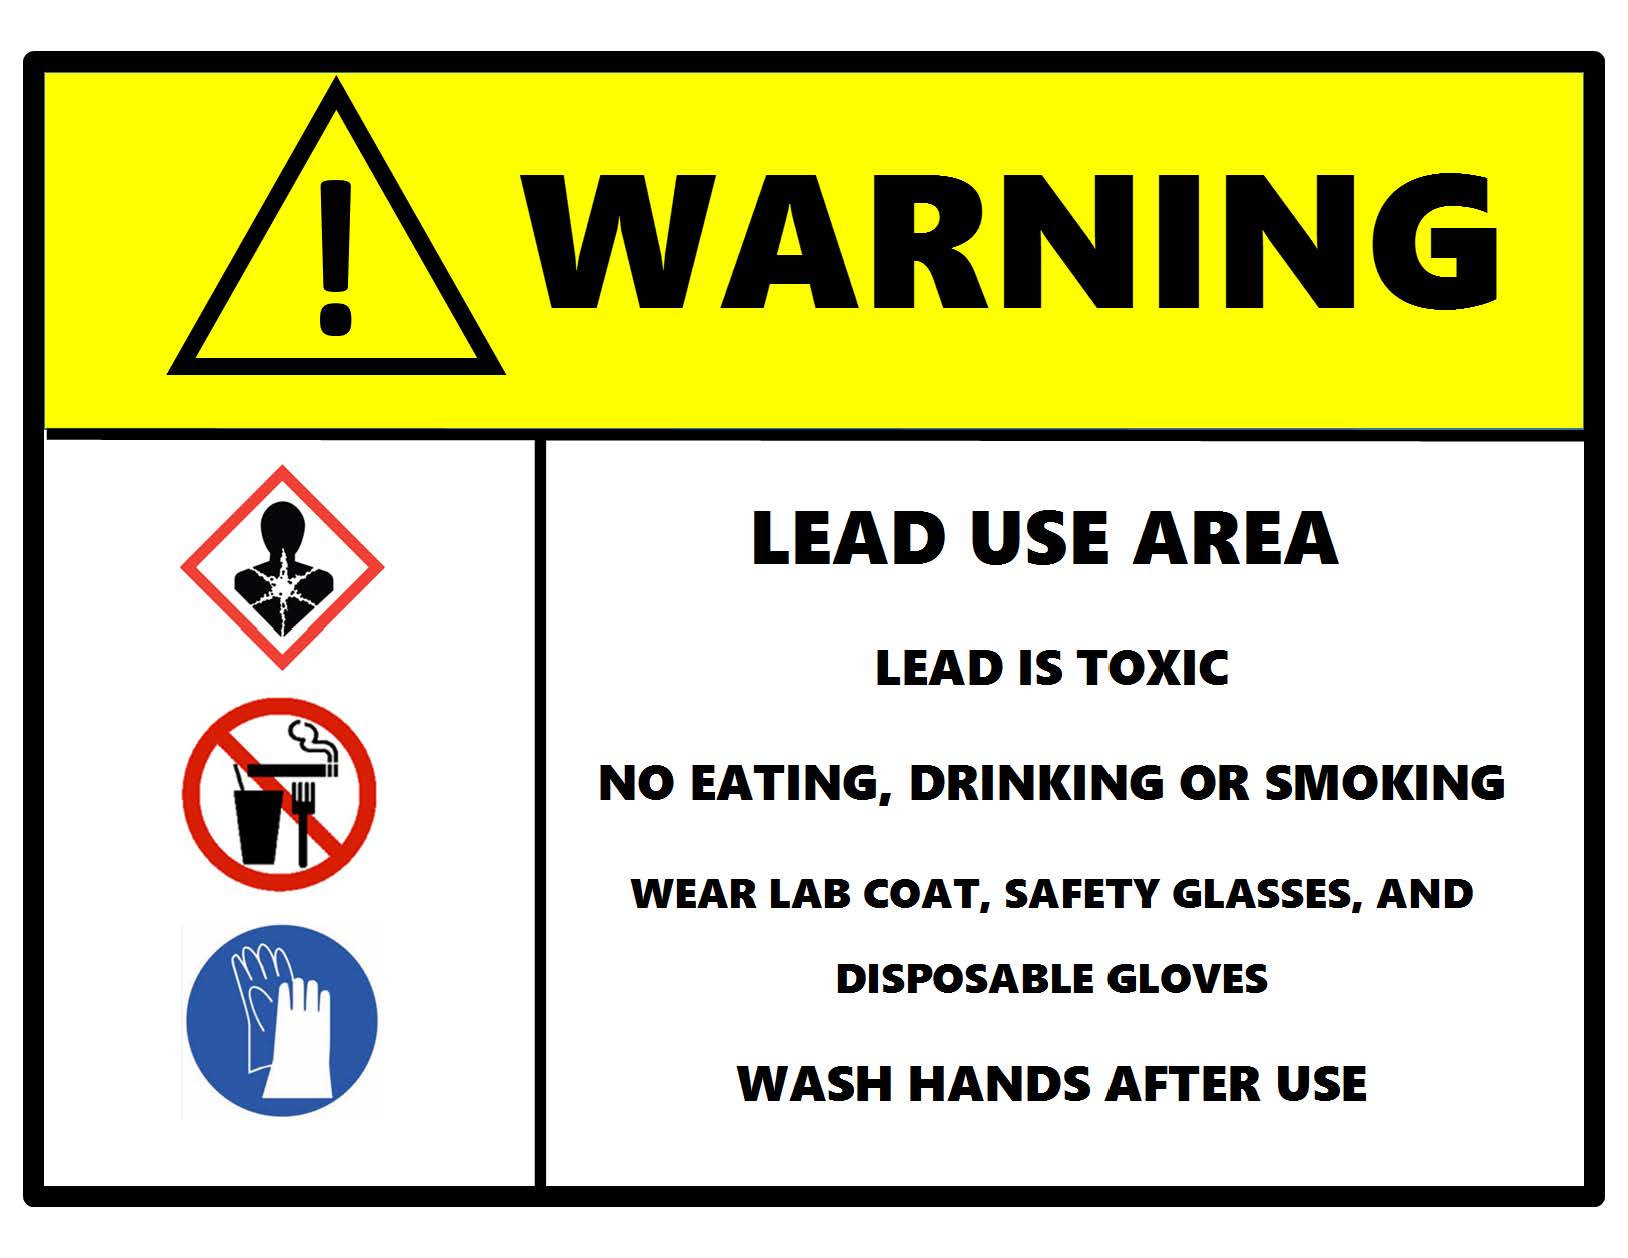 lead use area warning sign